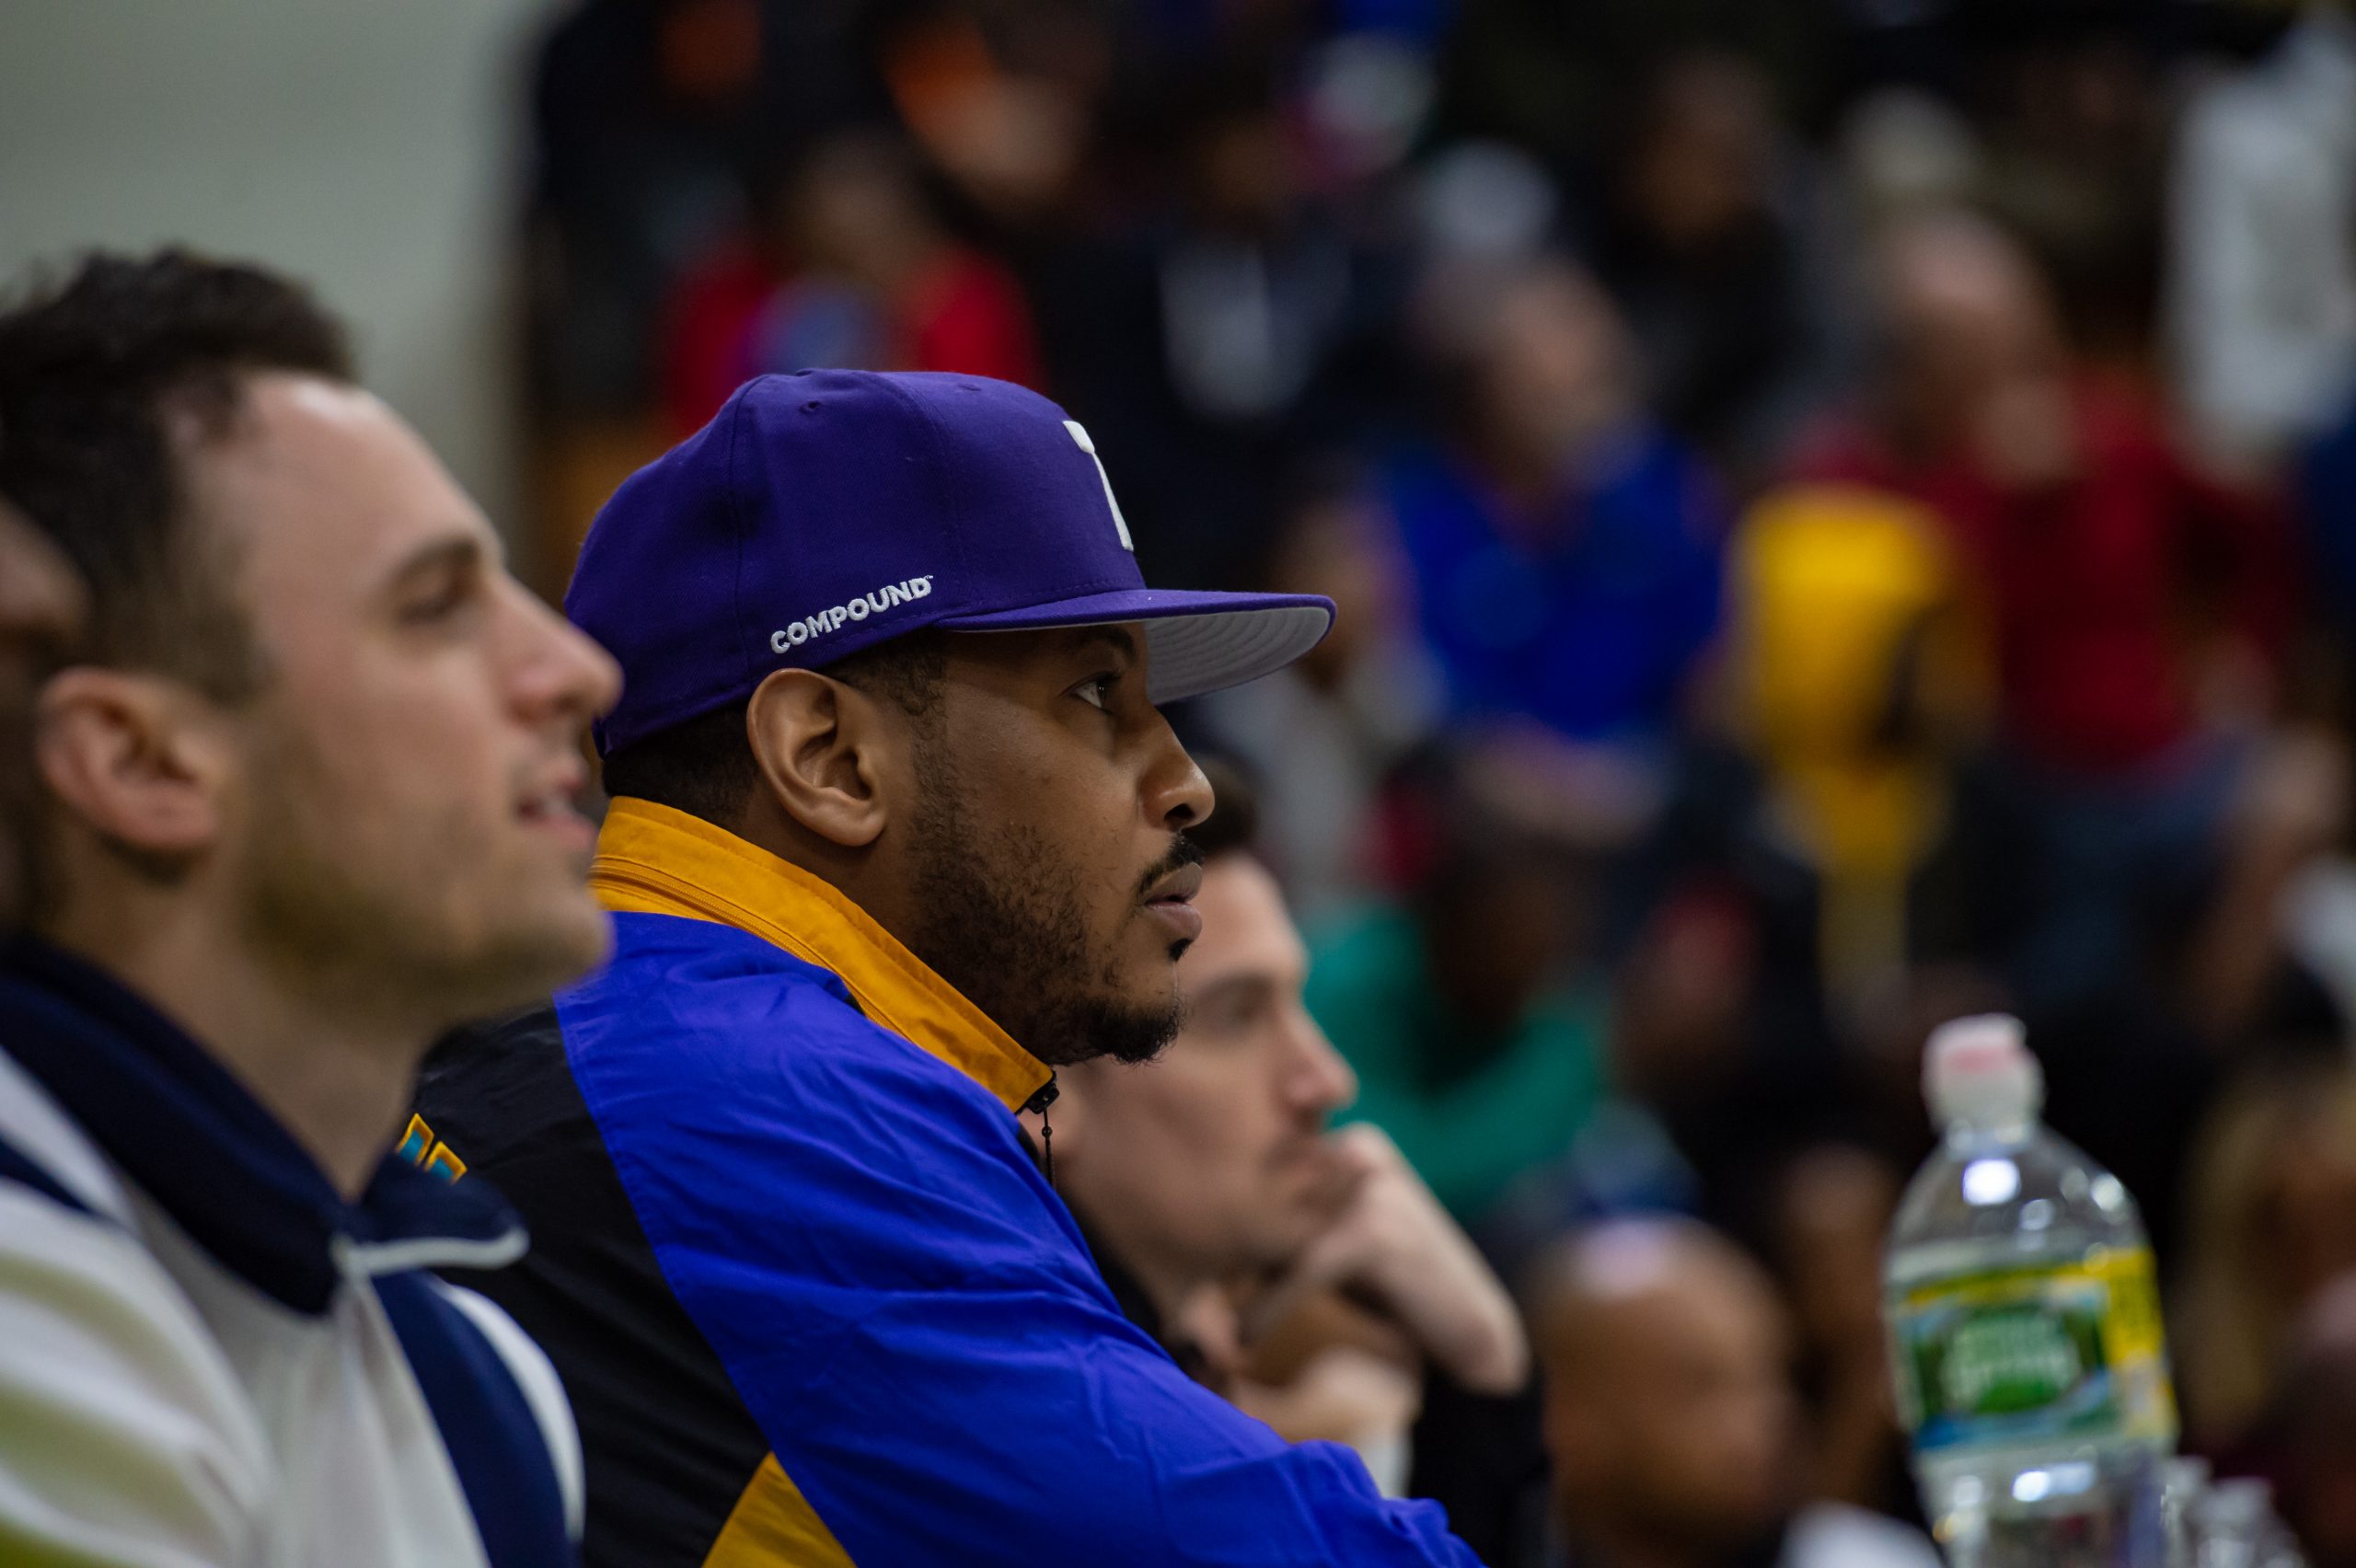 Carmelo Anthony and Kevin Durant’s High School, Oak Hill Academy, Is a Dynasty of NBA Talent